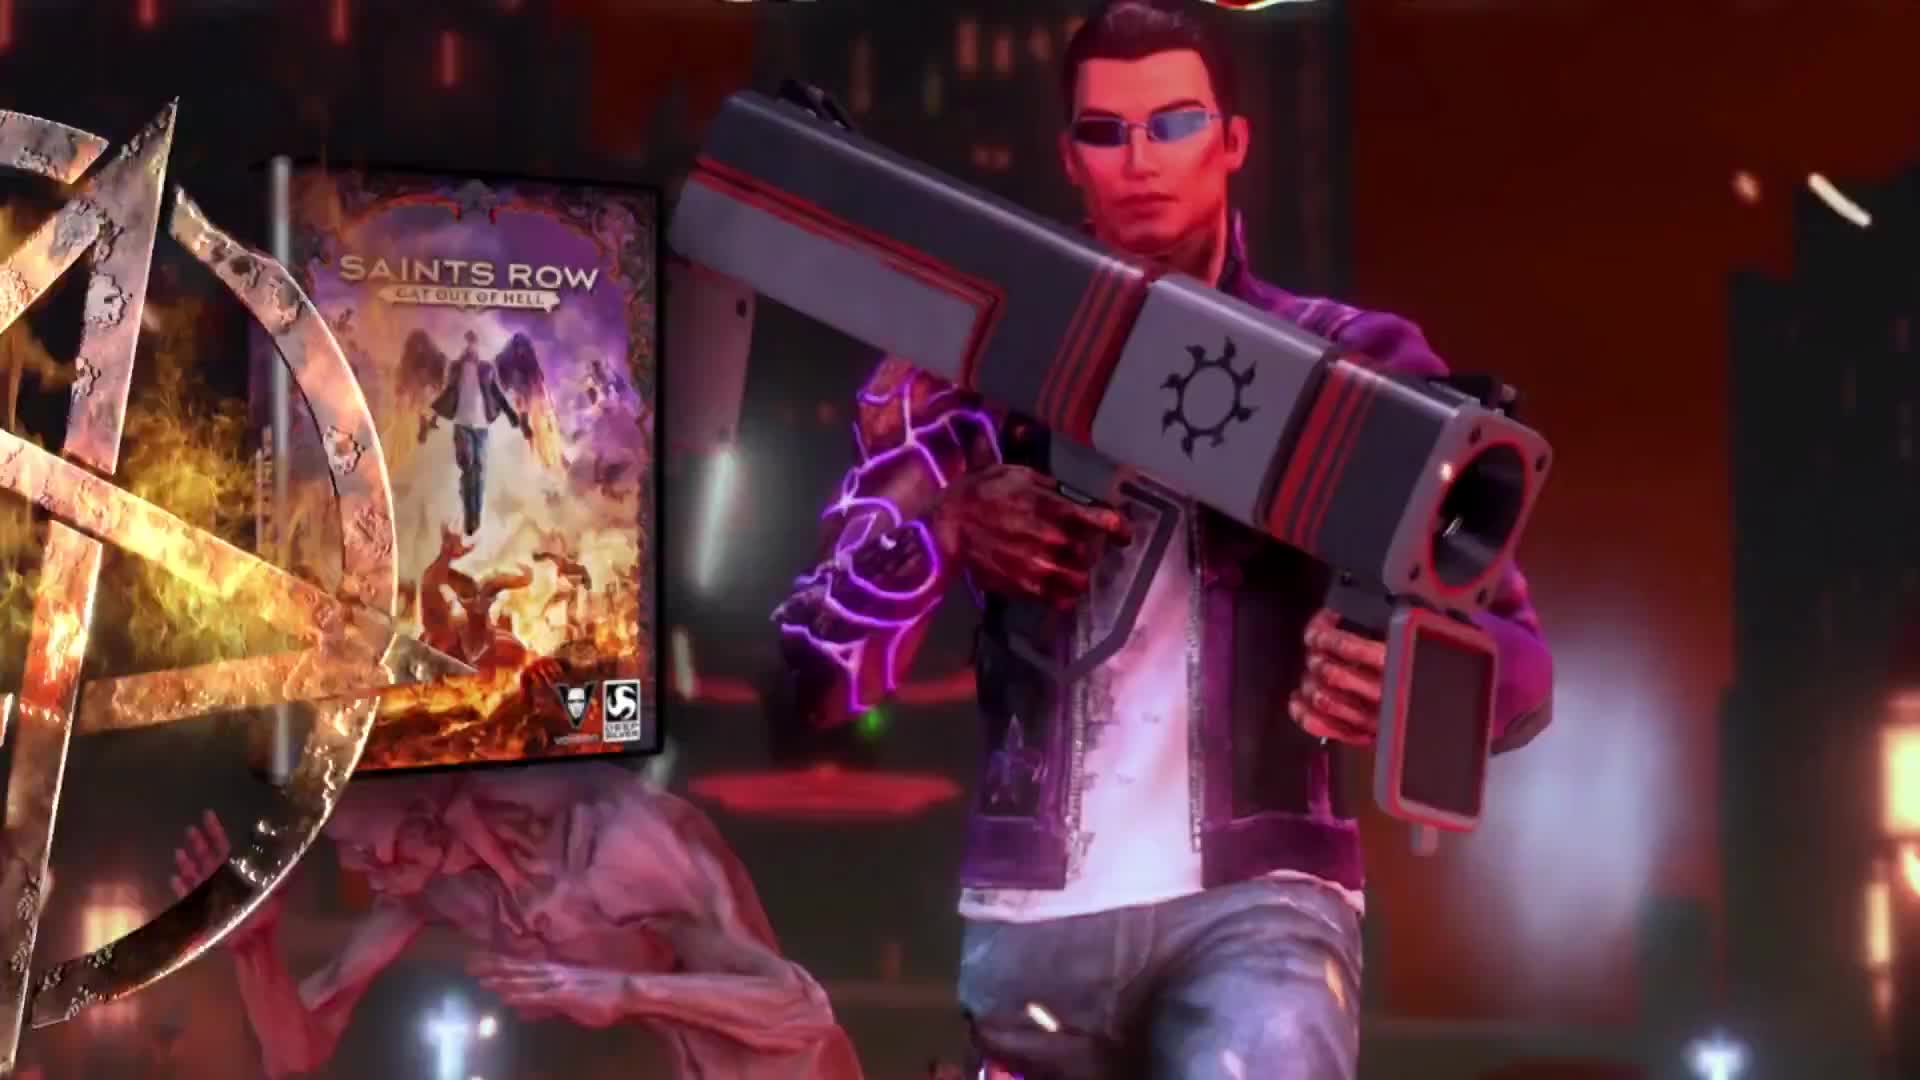 Saints Row 4 Re-Elected & Gat Out of Hell - Launch Trailer